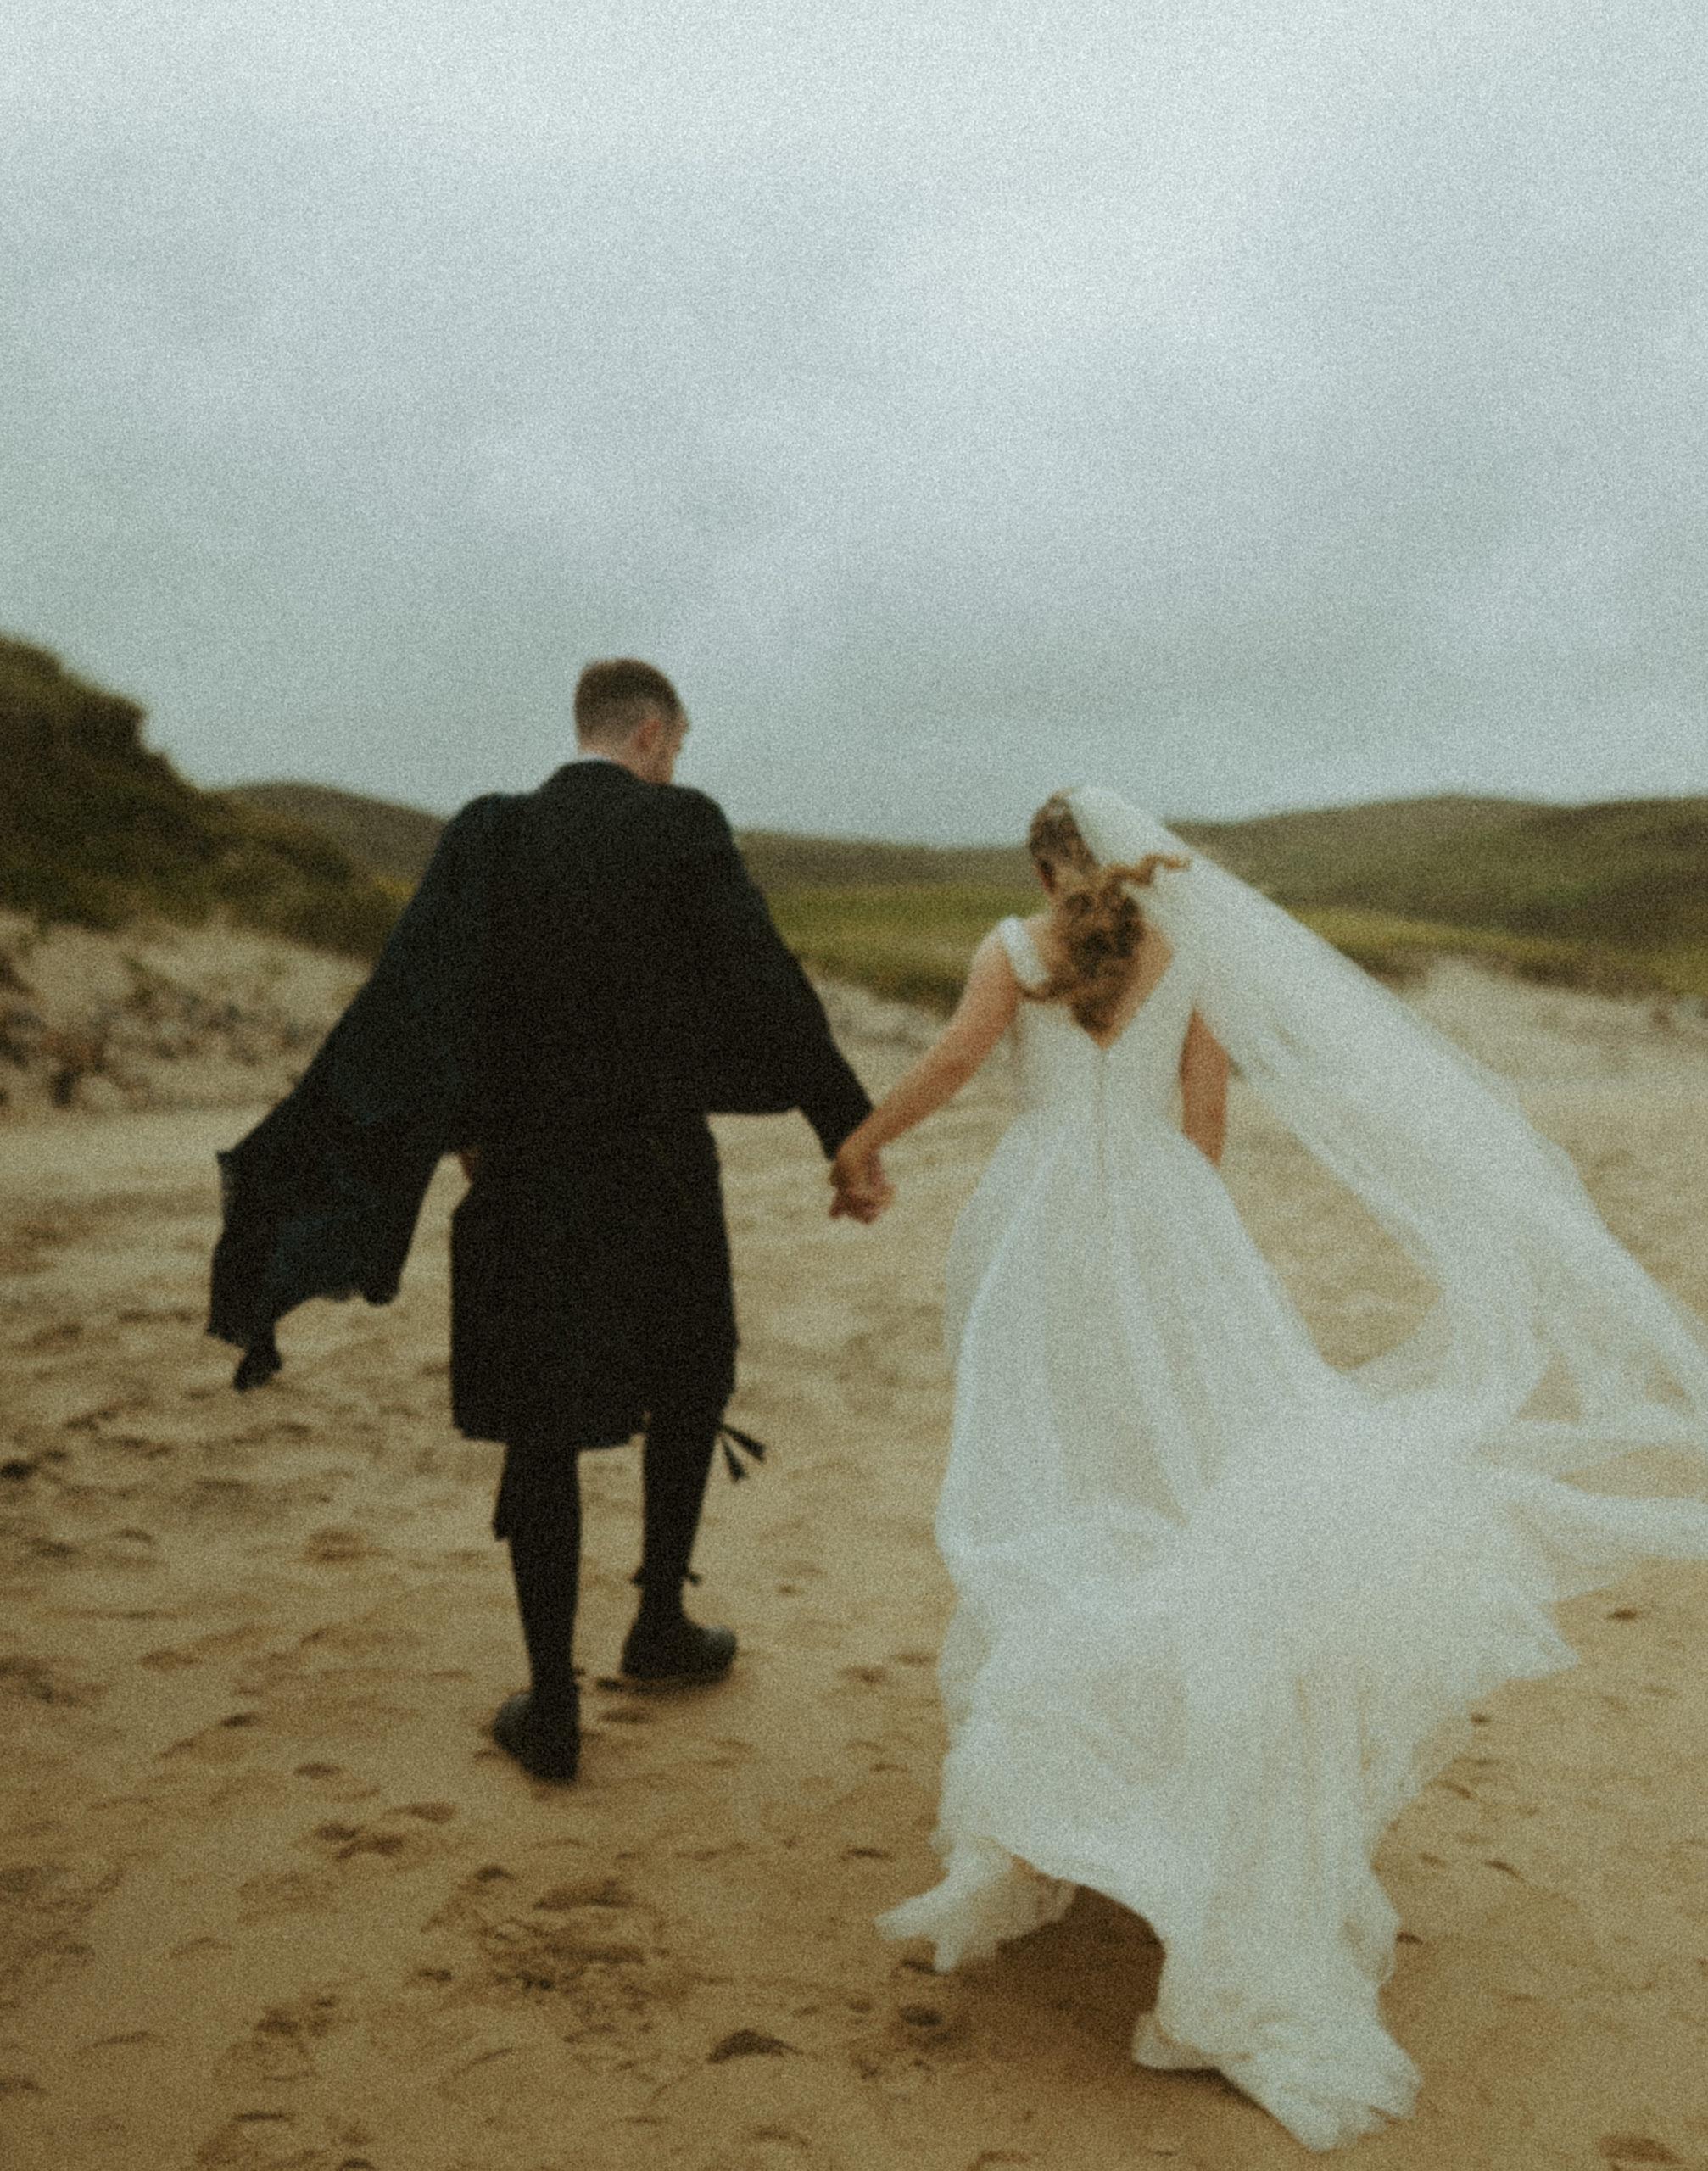 the couple running through the sand